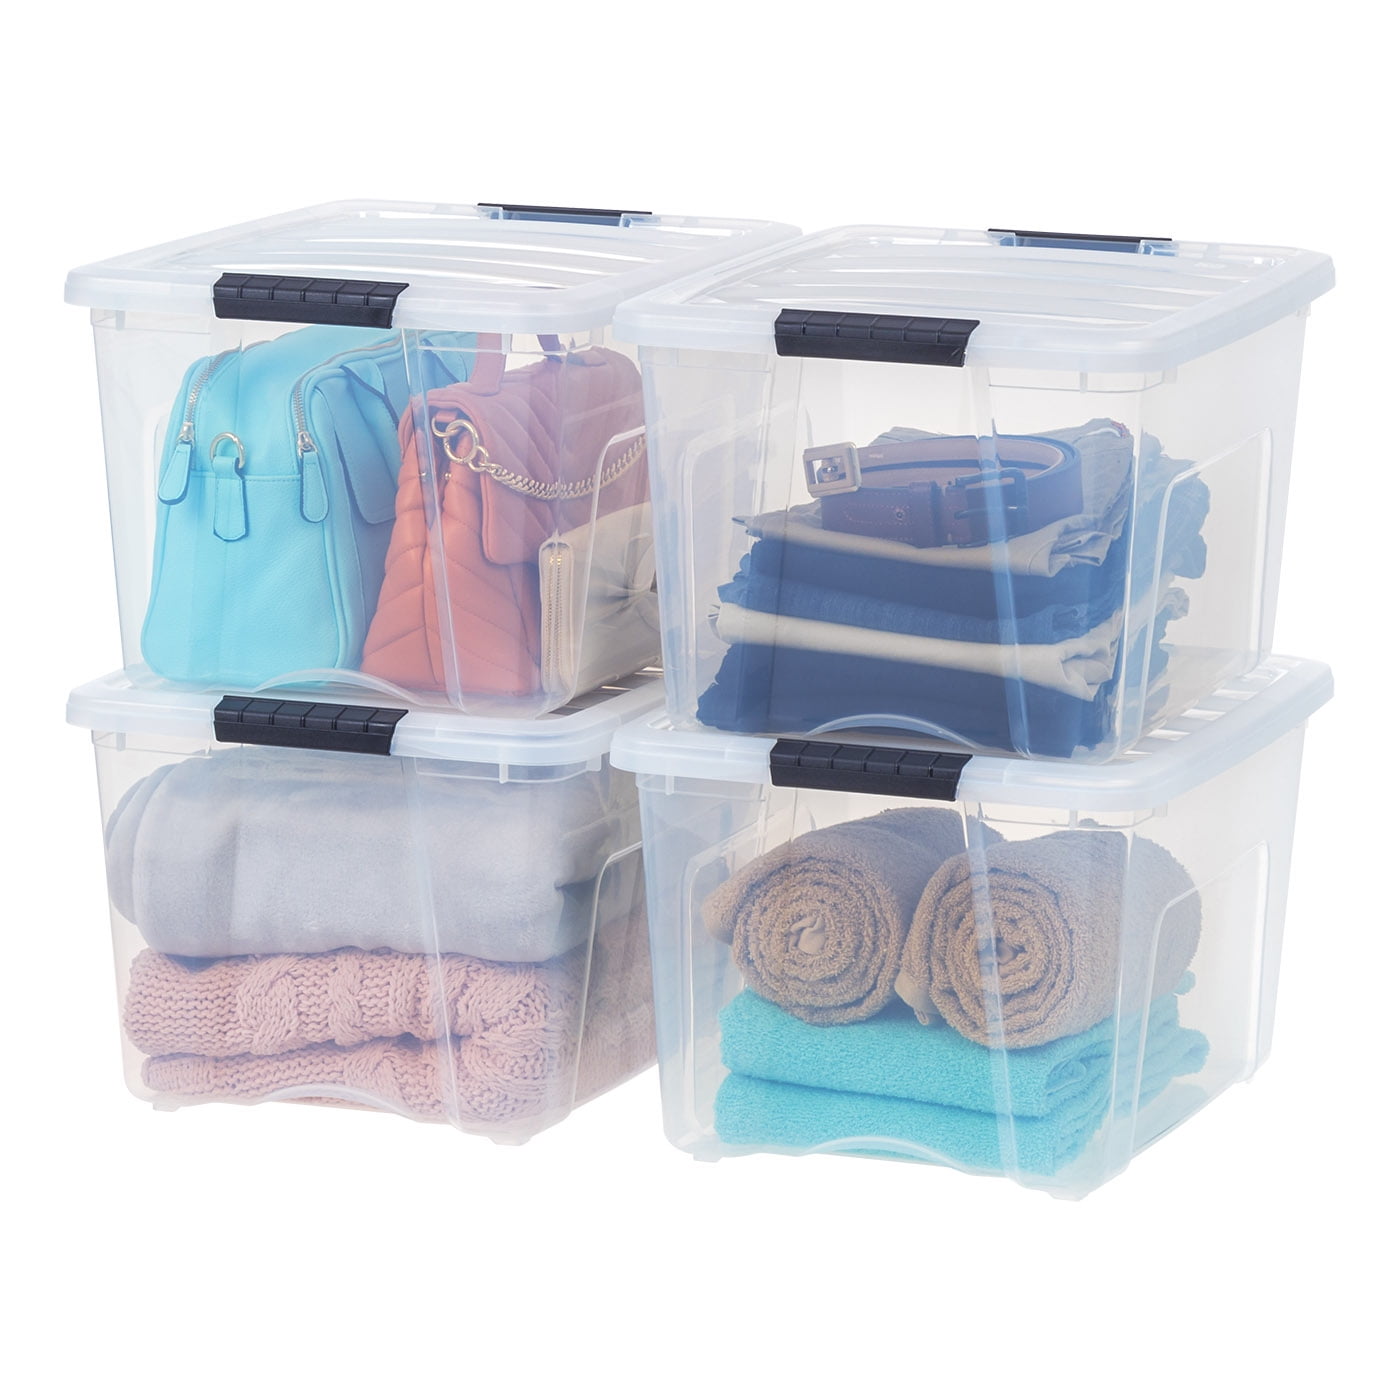 IRIS USA 72 Quart Stackable Plastic Storage Bins with Lids and Latching  Buckles, 4 Pack - Clear, Containers with Lids and Latches, Durable Nestable